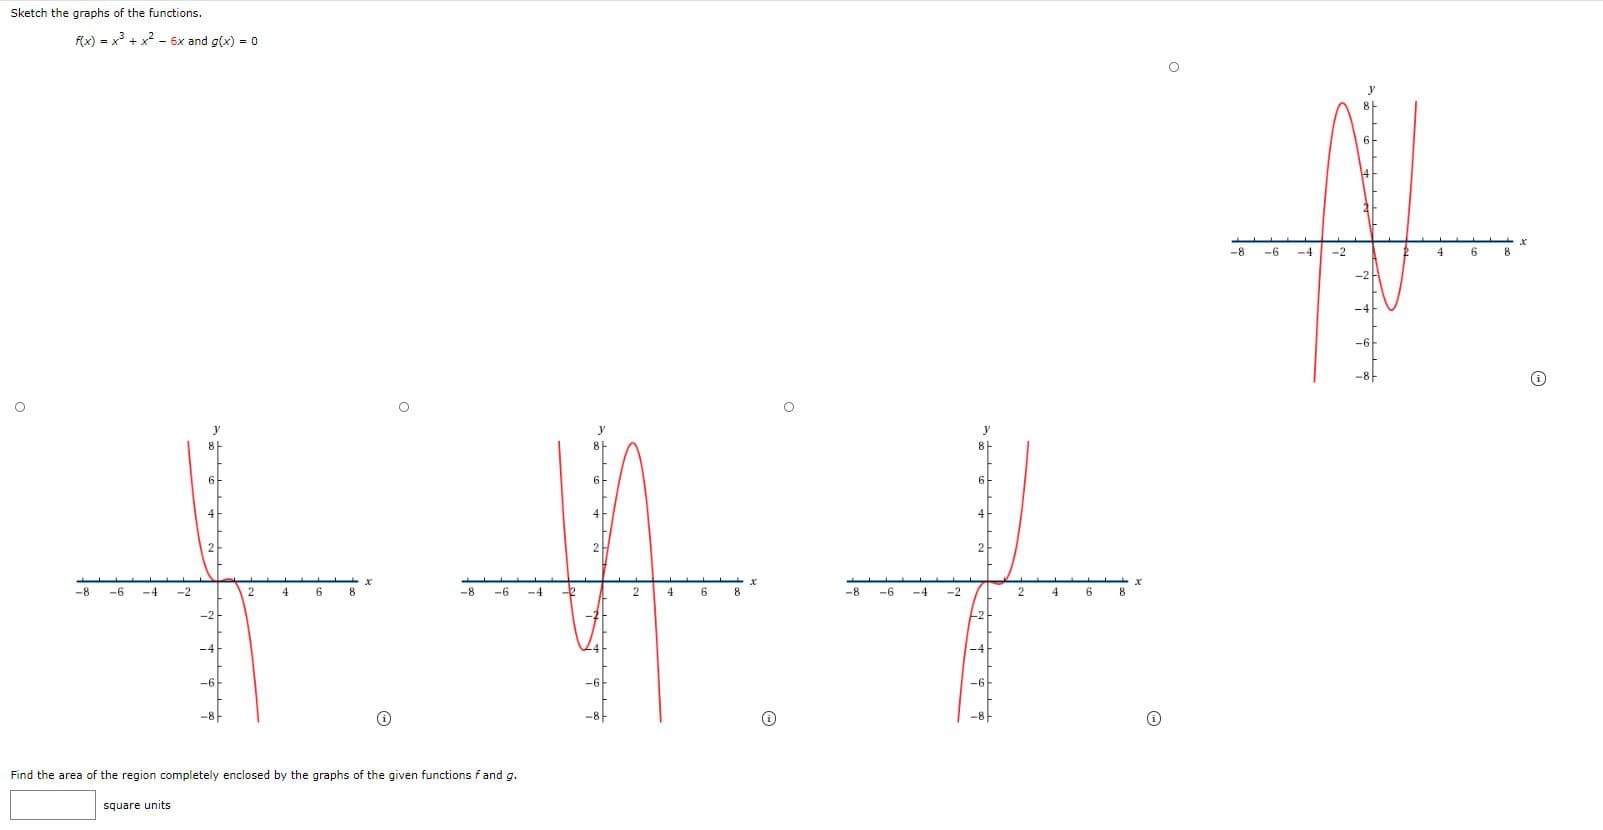 Sketch the graphs of the functions.
Fx) = x + x2 - 6x and g(x) = 0
-8
-6
-4
-2
4
6
8
y
6-
6
2
2
-8
-6
-4
-2
2
4
8
-8
-6
-4
4
6
8
-8
-6
-4
-2
4
8
-2
-6
-8
Find the area of the region completely enclosed by the graphs of the given functions f and g.
square units
